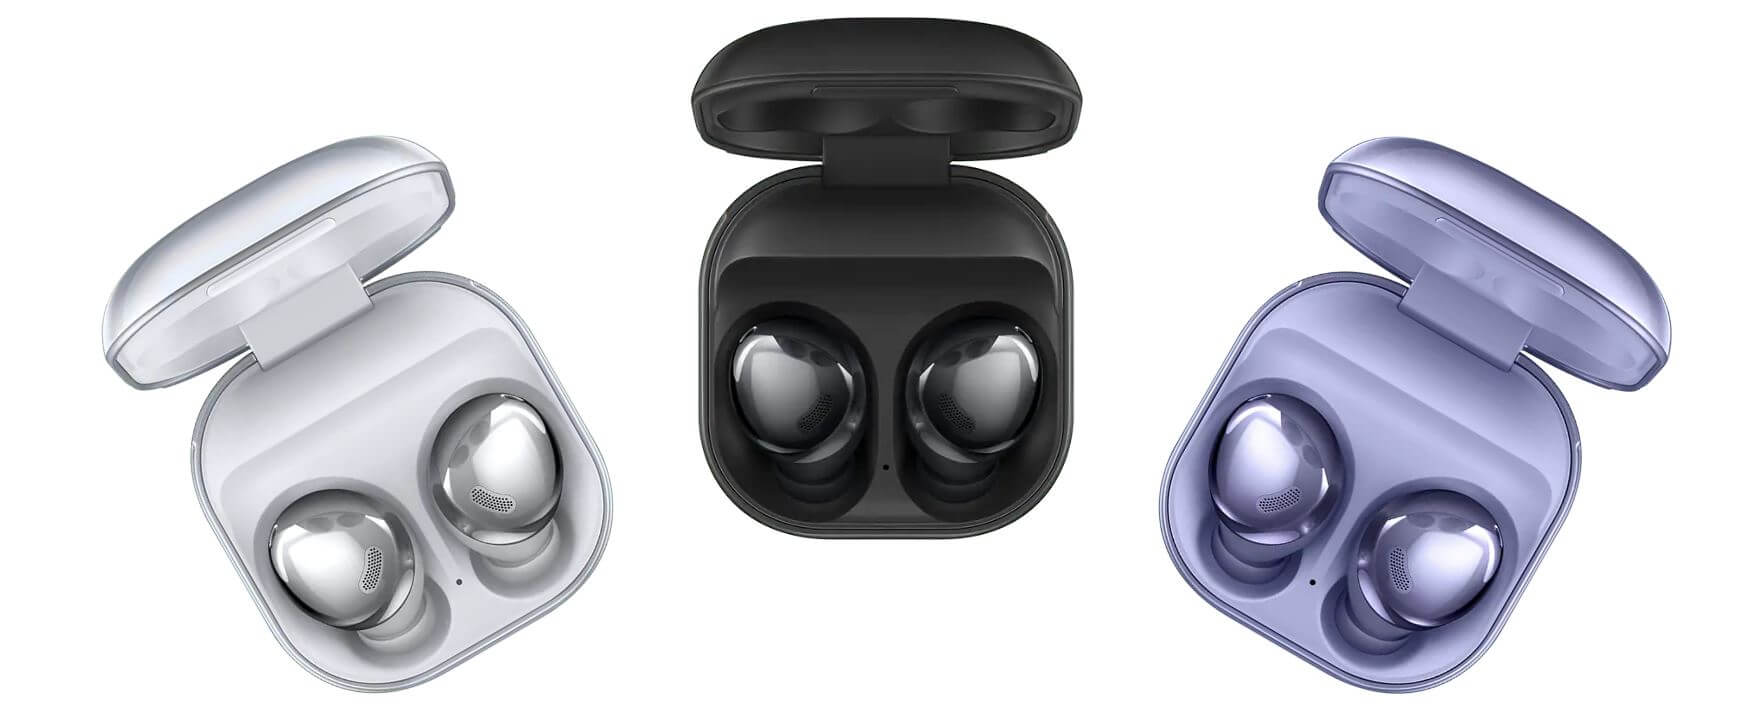 Samsung Galaxy Buds Pro Announced: Price and Availability in Nepal